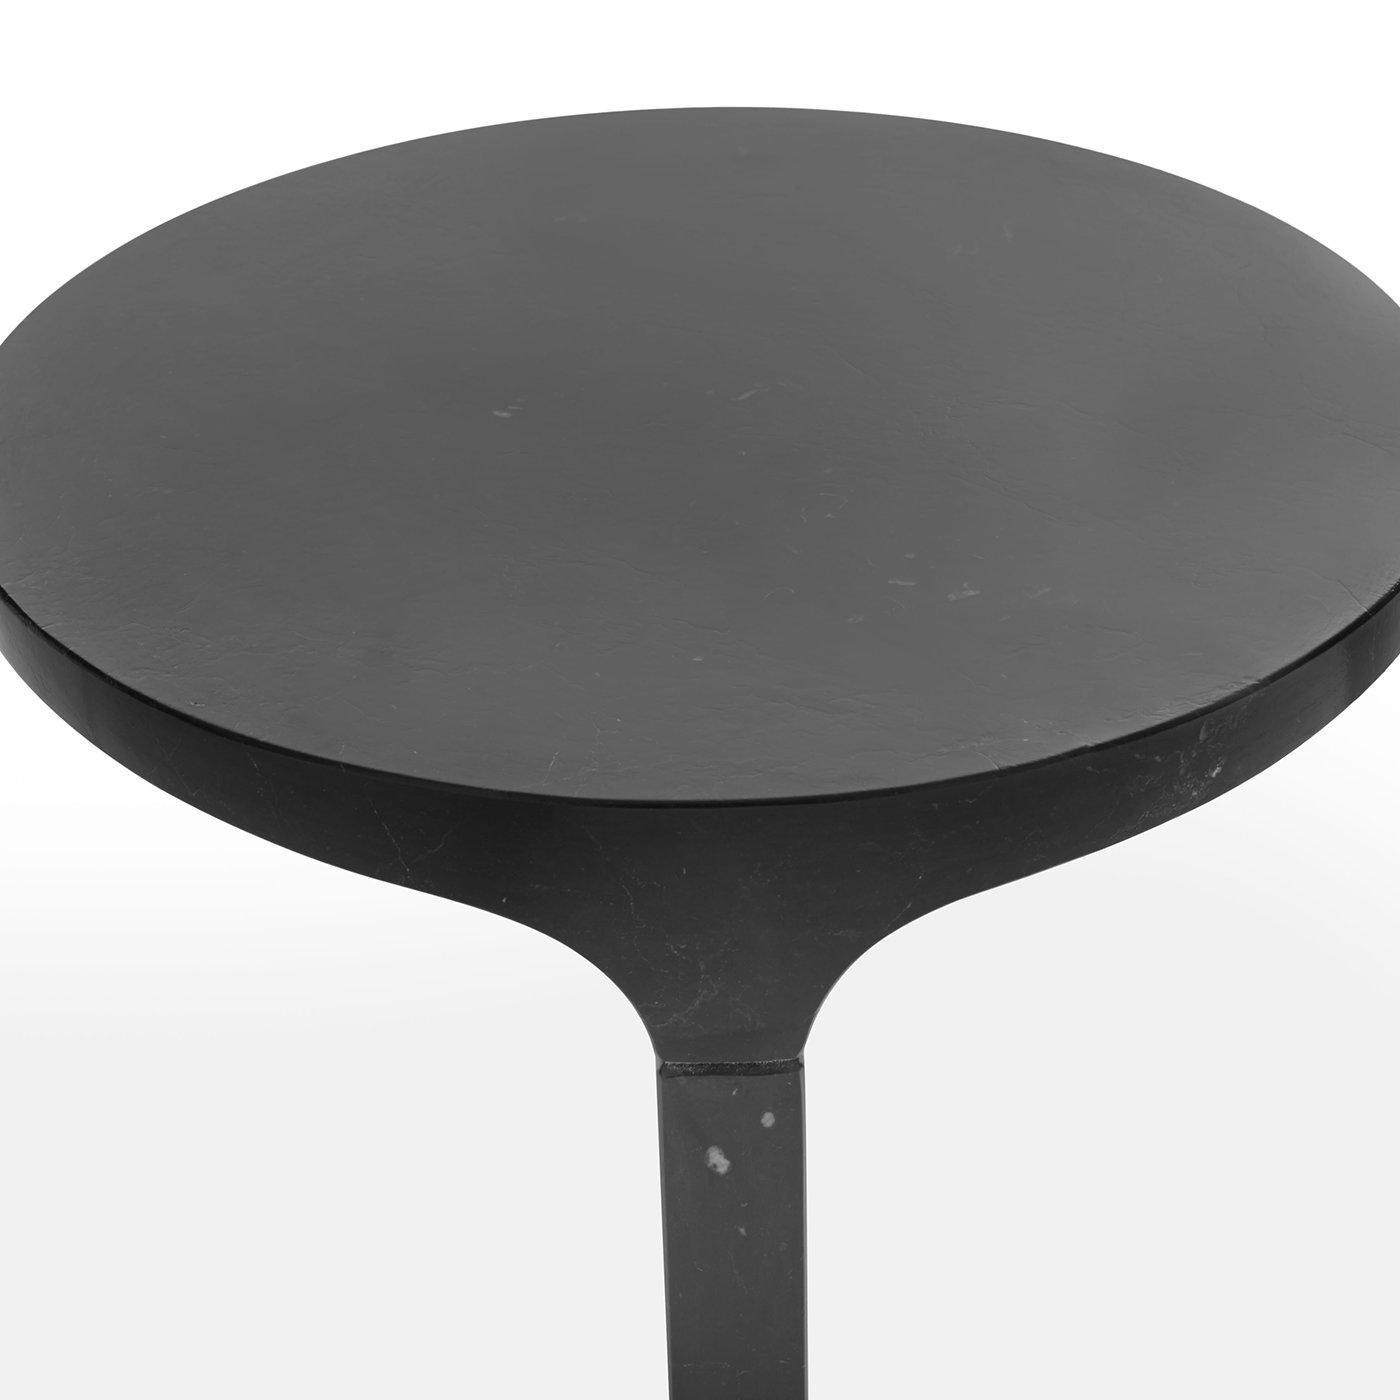 Round side table, in black Marquina marble, matte polished finish also available in white Carrara marble, matte polished finish.